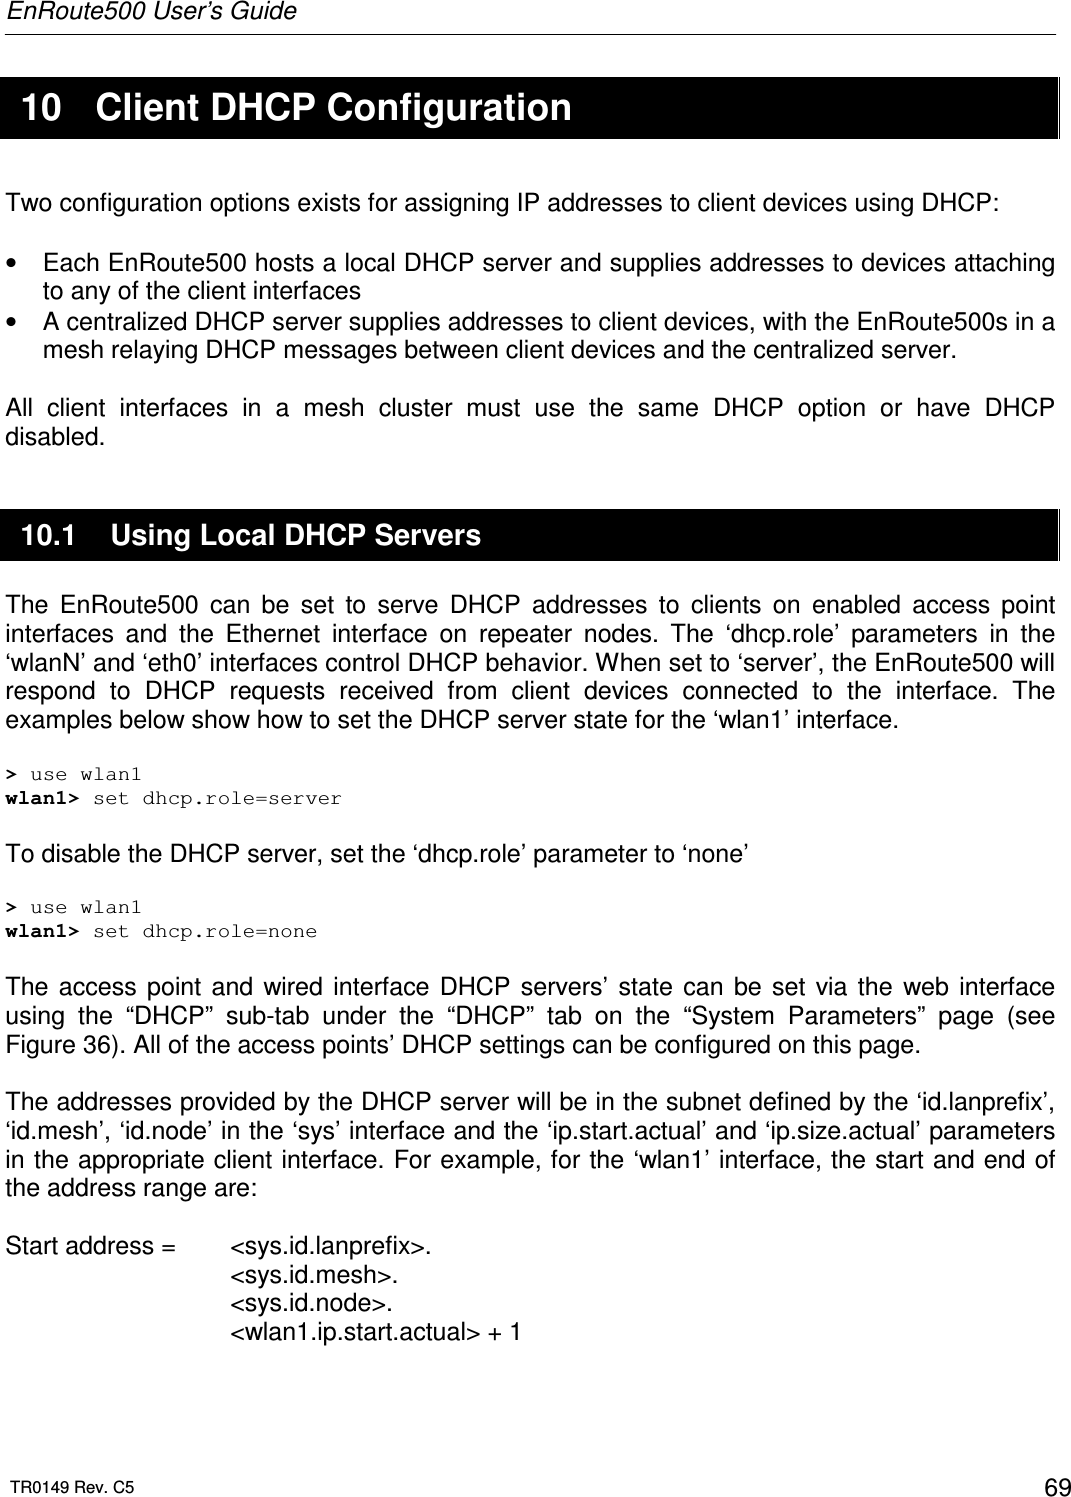 EnRoute500 User’s Guide  TR0149 Rev. C5  69  10  Client DHCP Configuration Two configuration options exists for assigning IP addresses to client devices using DHCP:  •  Each EnRoute500 hosts a local DHCP server and supplies addresses to devices attaching to any of the client interfaces  •  A centralized DHCP server supplies addresses to client devices, with the EnRoute500s in a mesh relaying DHCP messages between client devices and the centralized server.  All  client  interfaces  in  a  mesh  cluster  must  use  the  same  DHCP  option  or  have  DHCP disabled. 10.1  Using Local DHCP Servers The  EnRoute500  can  be  set  to  serve  DHCP  addresses  to  clients  on  enabled  access  point interfaces  and  the  Ethernet  interface  on  repeater  nodes.  The  ‘dhcp.role’  parameters  in  the ‘wlanN’ and ‘eth0’ interfaces control DHCP behavior. When set to ‘server’, the EnRoute500 will respond  to  DHCP  requests  received  from  client  devices  connected  to  the  interface.  The examples below show how to set the DHCP server state for the ‘wlan1’ interface.  &gt; use wlan1 wlan1&gt; set dhcp.role=server  To disable the DHCP server, set the ‘dhcp.role’ parameter to ‘none’  &gt; use wlan1 wlan1&gt; set dhcp.role=none  The  access  point  and  wired  interface  DHCP servers’  state  can  be  set  via  the  web  interface using  the  “DHCP”  sub-tab  under  the  “DHCP”  tab  on  the  “System  Parameters”  page  (see Figure 36). All of the access points’ DHCP settings can be configured on this page.  The addresses provided by the DHCP server will be in the subnet defined by the ‘id.lanprefix’, ‘id.mesh’, ‘id.node’ in the ‘sys’ interface and the ‘ip.start.actual’ and ‘ip.size.actual’ parameters in the appropriate client interface. For example, for the ‘wlan1’ interface, the start and end of the address range are:  Start address =   &lt;sys.id.lanprefix&gt;. &lt;sys.id.mesh&gt;. &lt;sys.id.node&gt;. &lt;wlan1.ip.start.actual&gt; + 1 